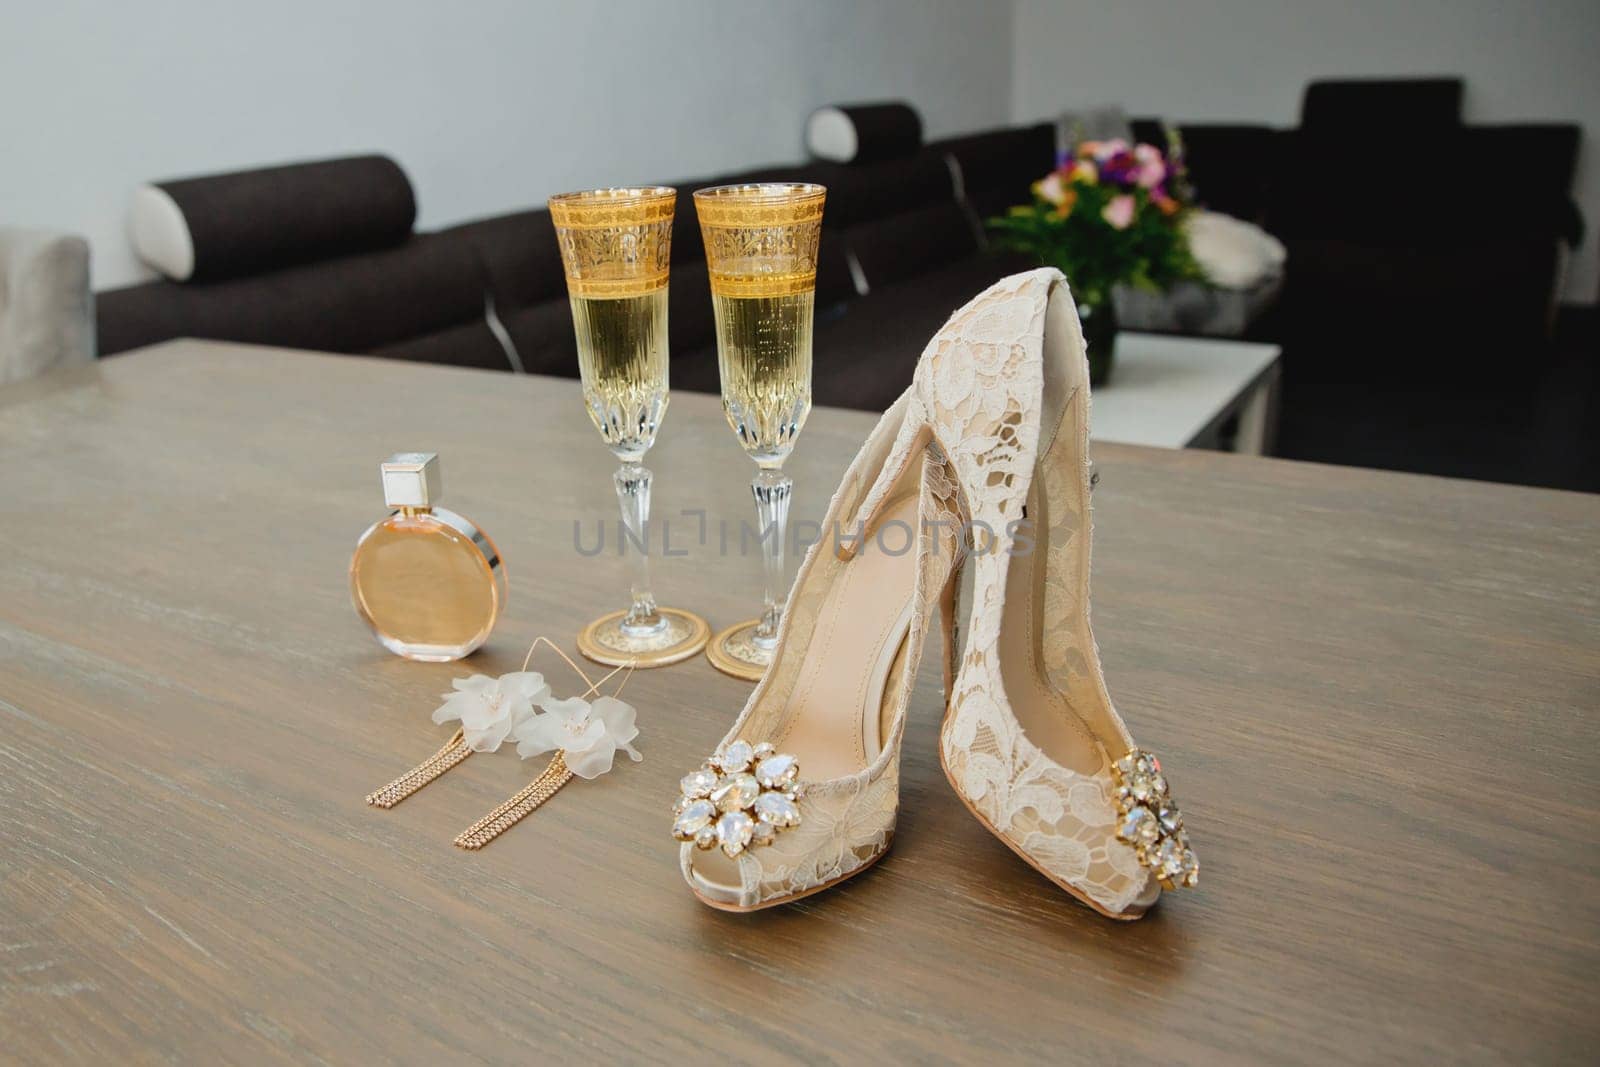 Set bride's accessories: perfume bottle, earrings, two glasses of champagne and women's shoes. Soft focus.